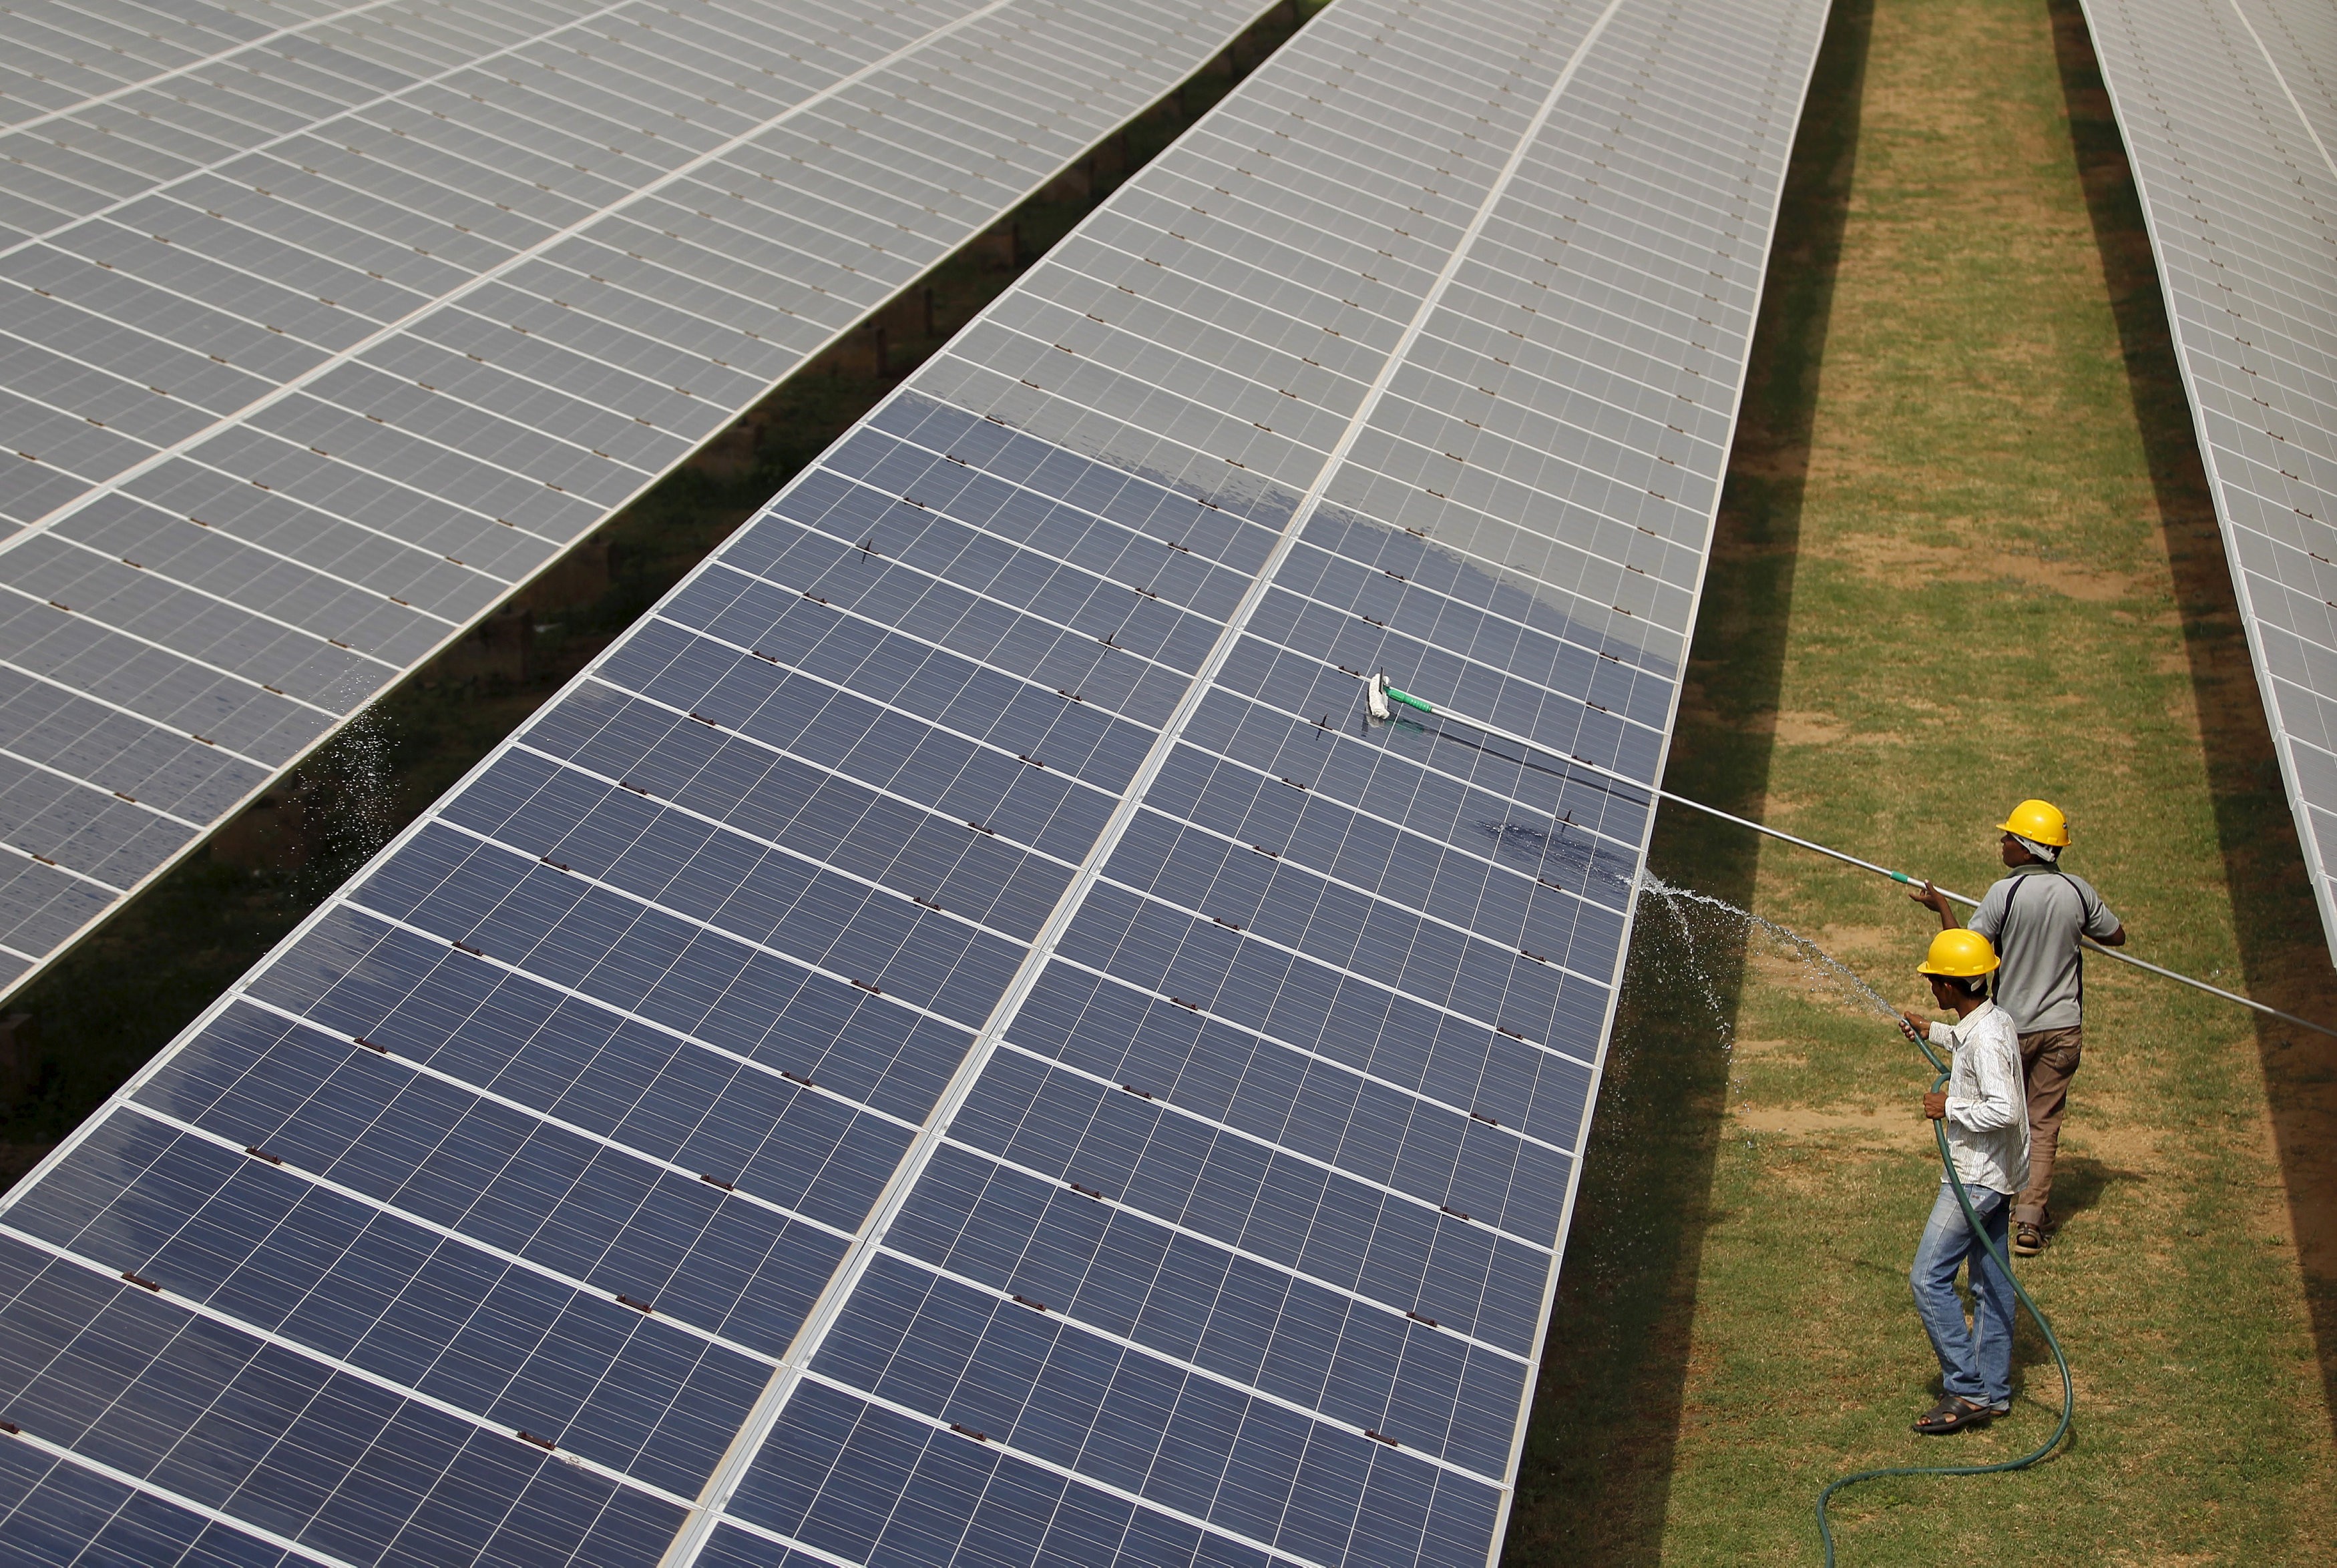 Workers clean a solar power plant in Gujarat, India. Photo: Reuters